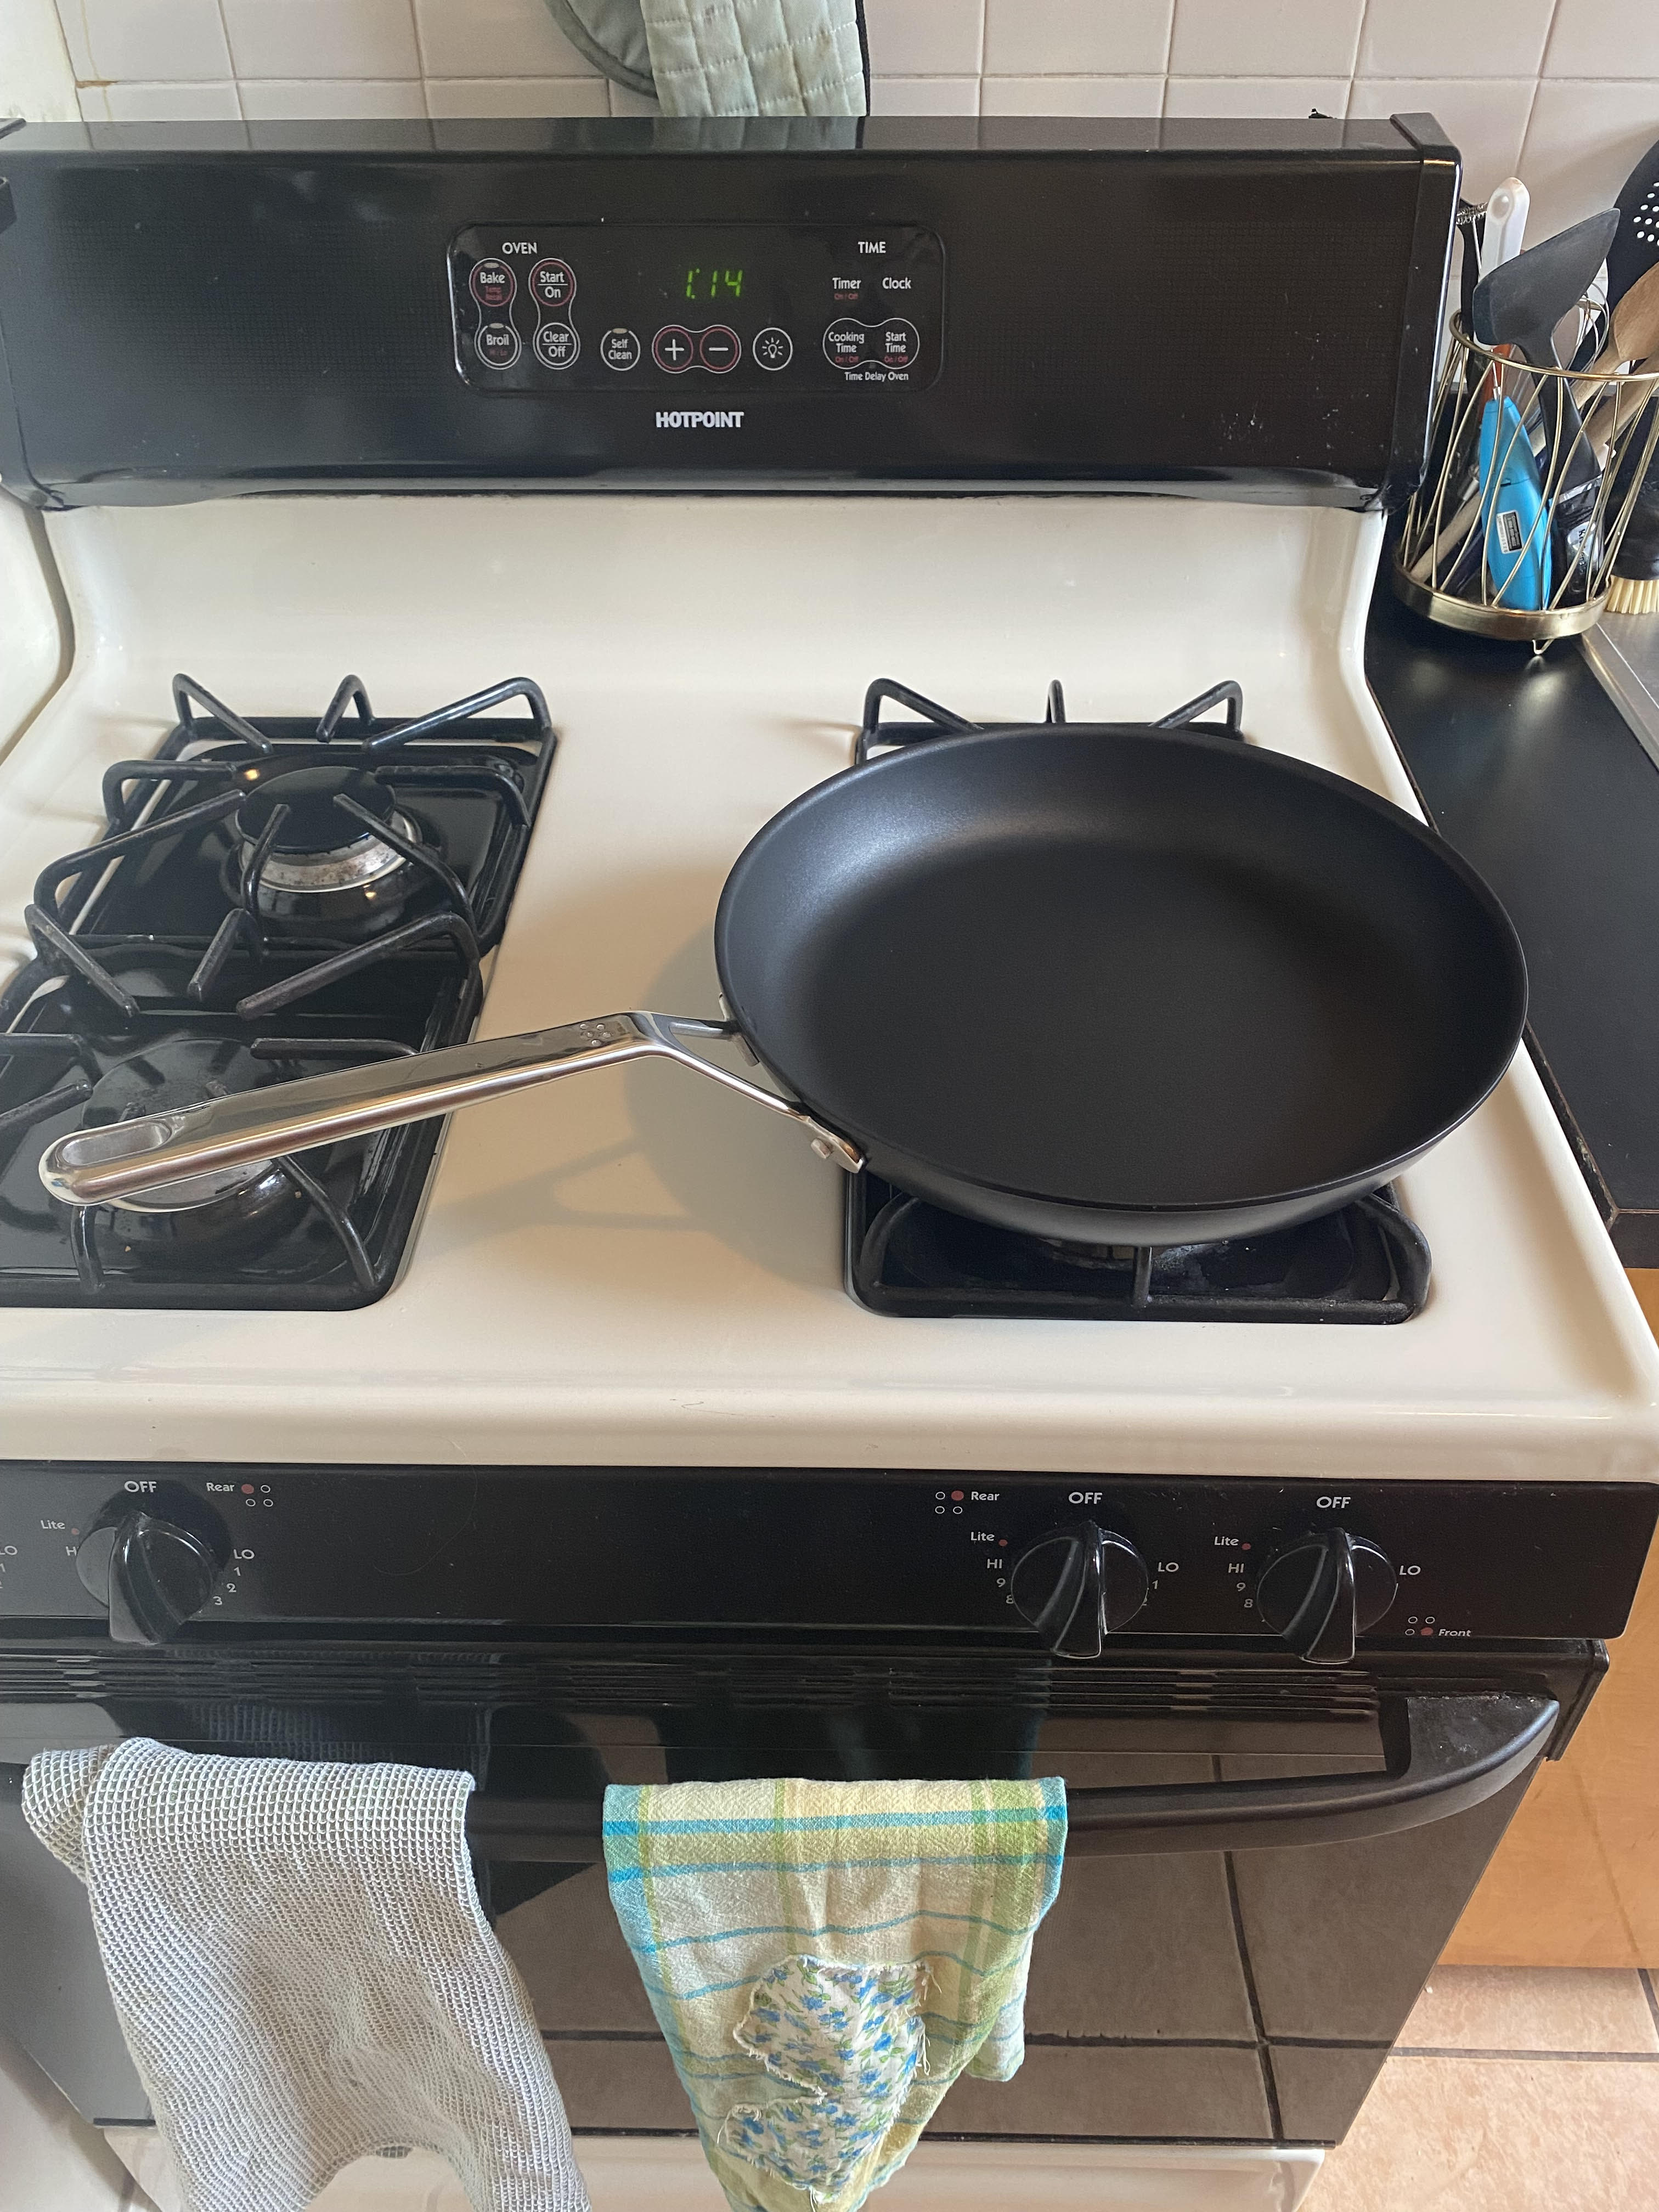 Misen's Nonstick Pan Sets Are Back in Stock—but Not for Long